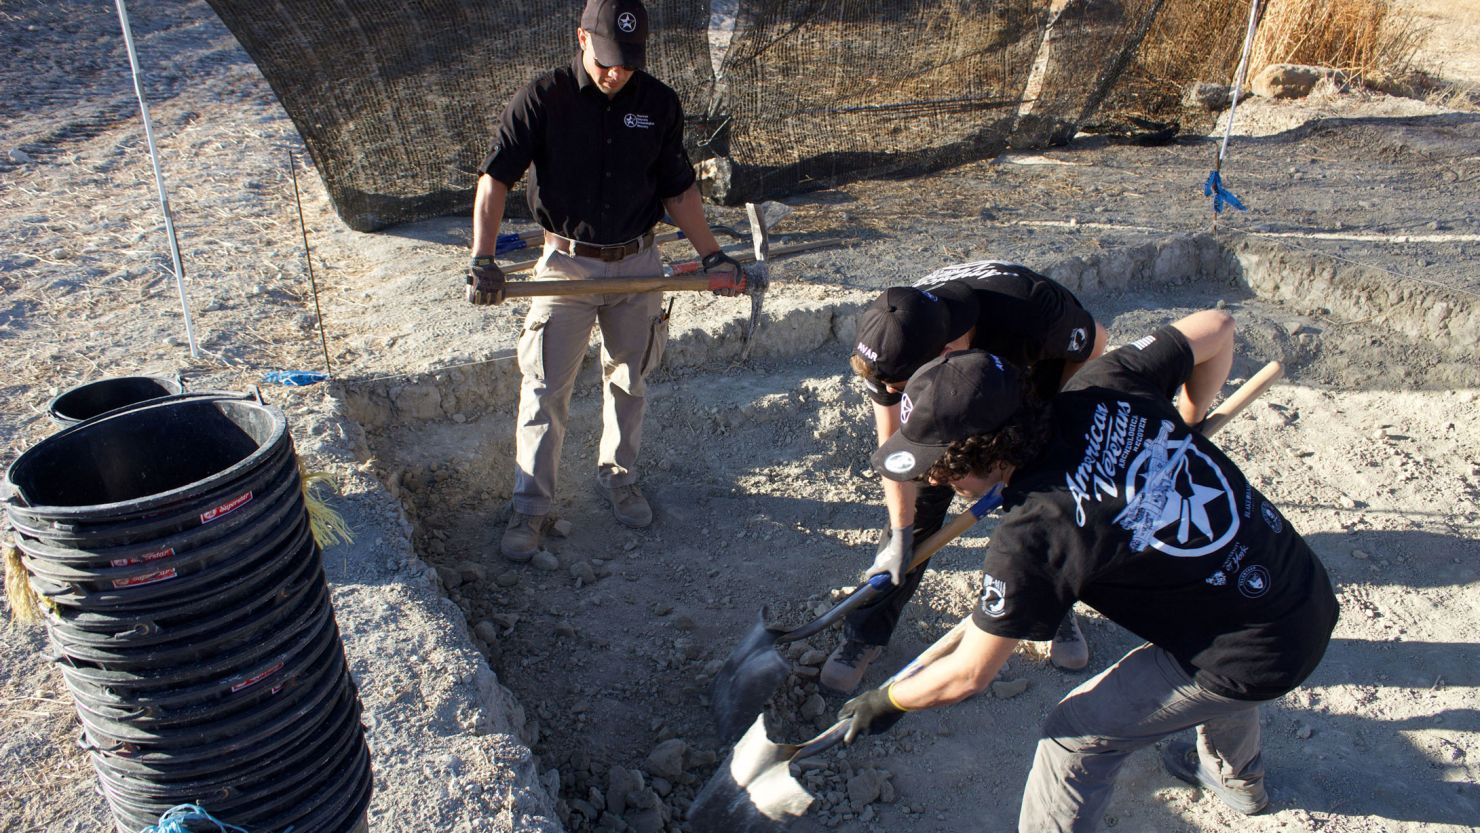 Collaborating on archaeology projects has mental health benefits for veterans, research shows.